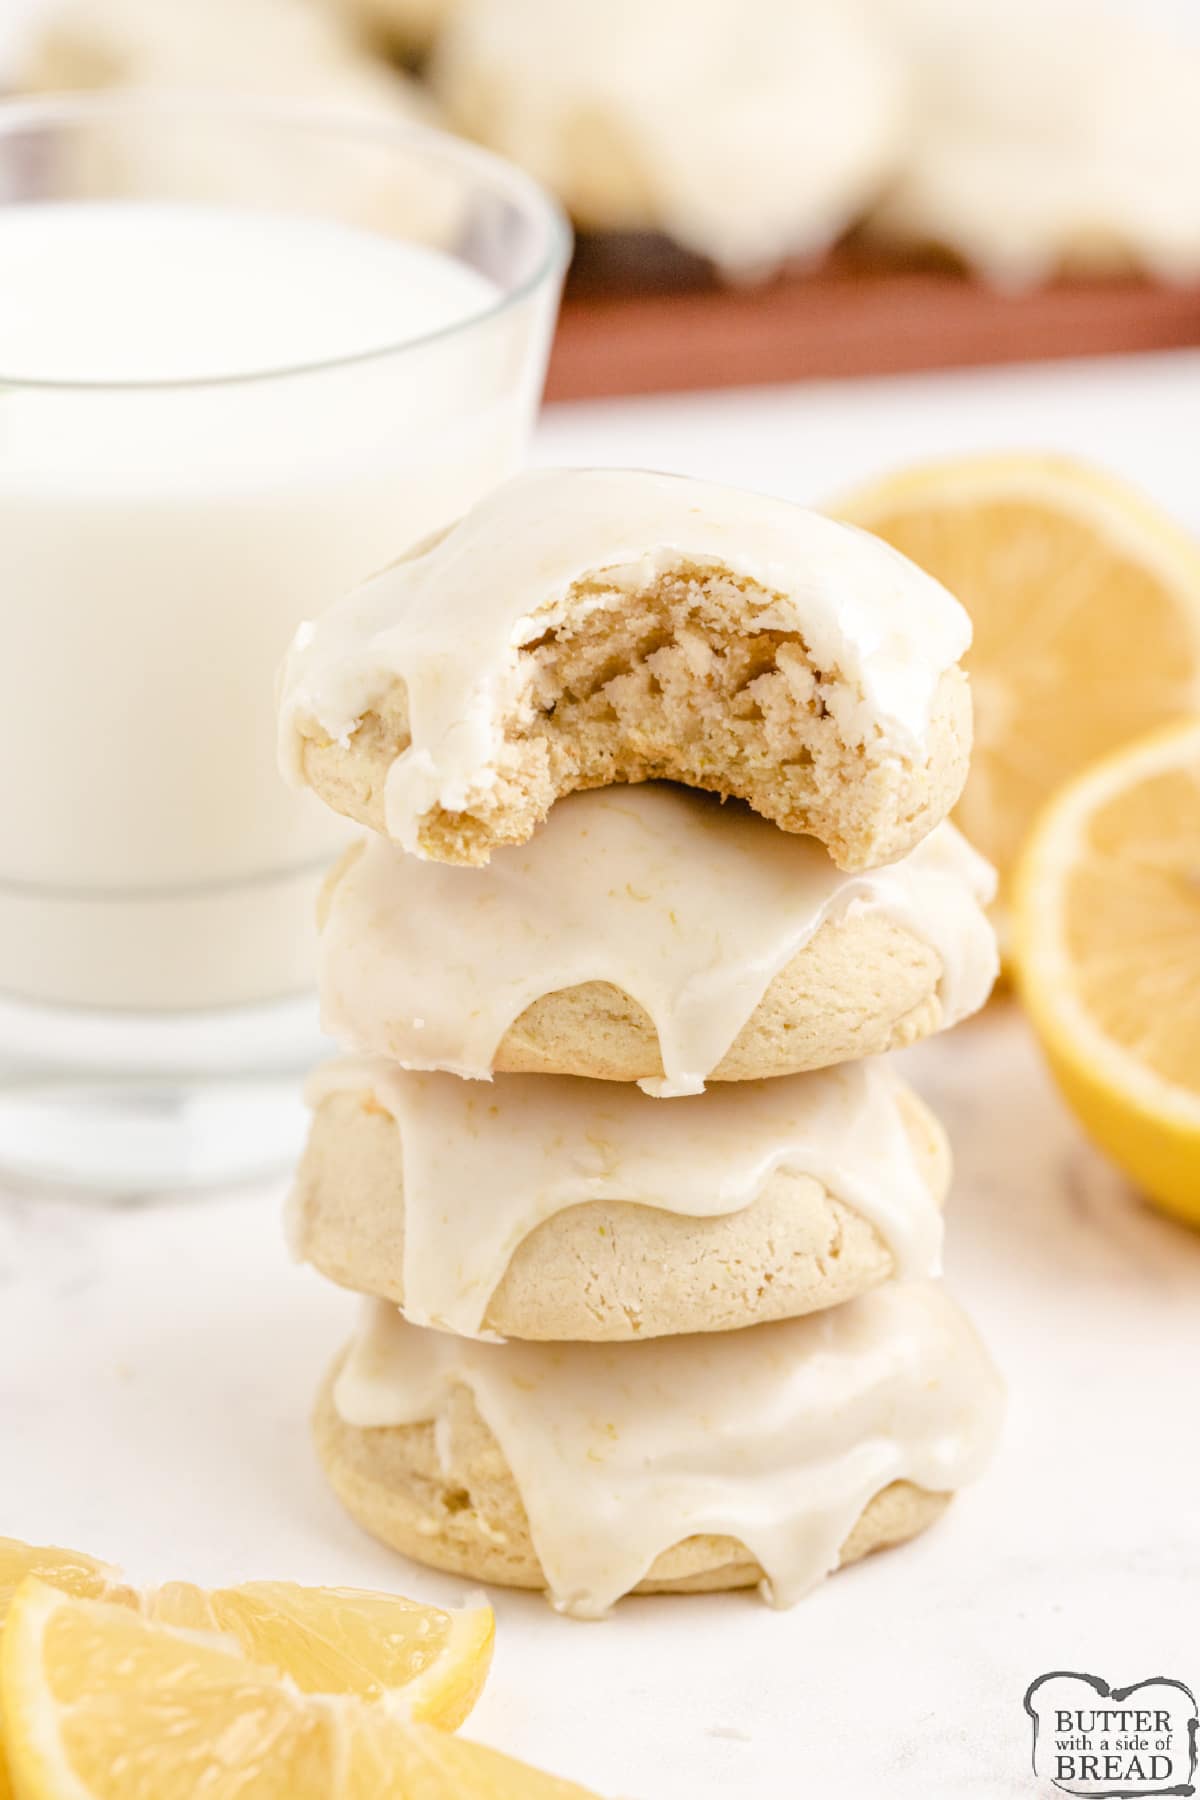 Lemon Cream Cheese Cookies are thick, soft cookies that are full of lemon flavor and are frosted with a simple lemon glaze. Delicious lemon cookie recipe made with lemon juice, lemon zest and cream cheese.